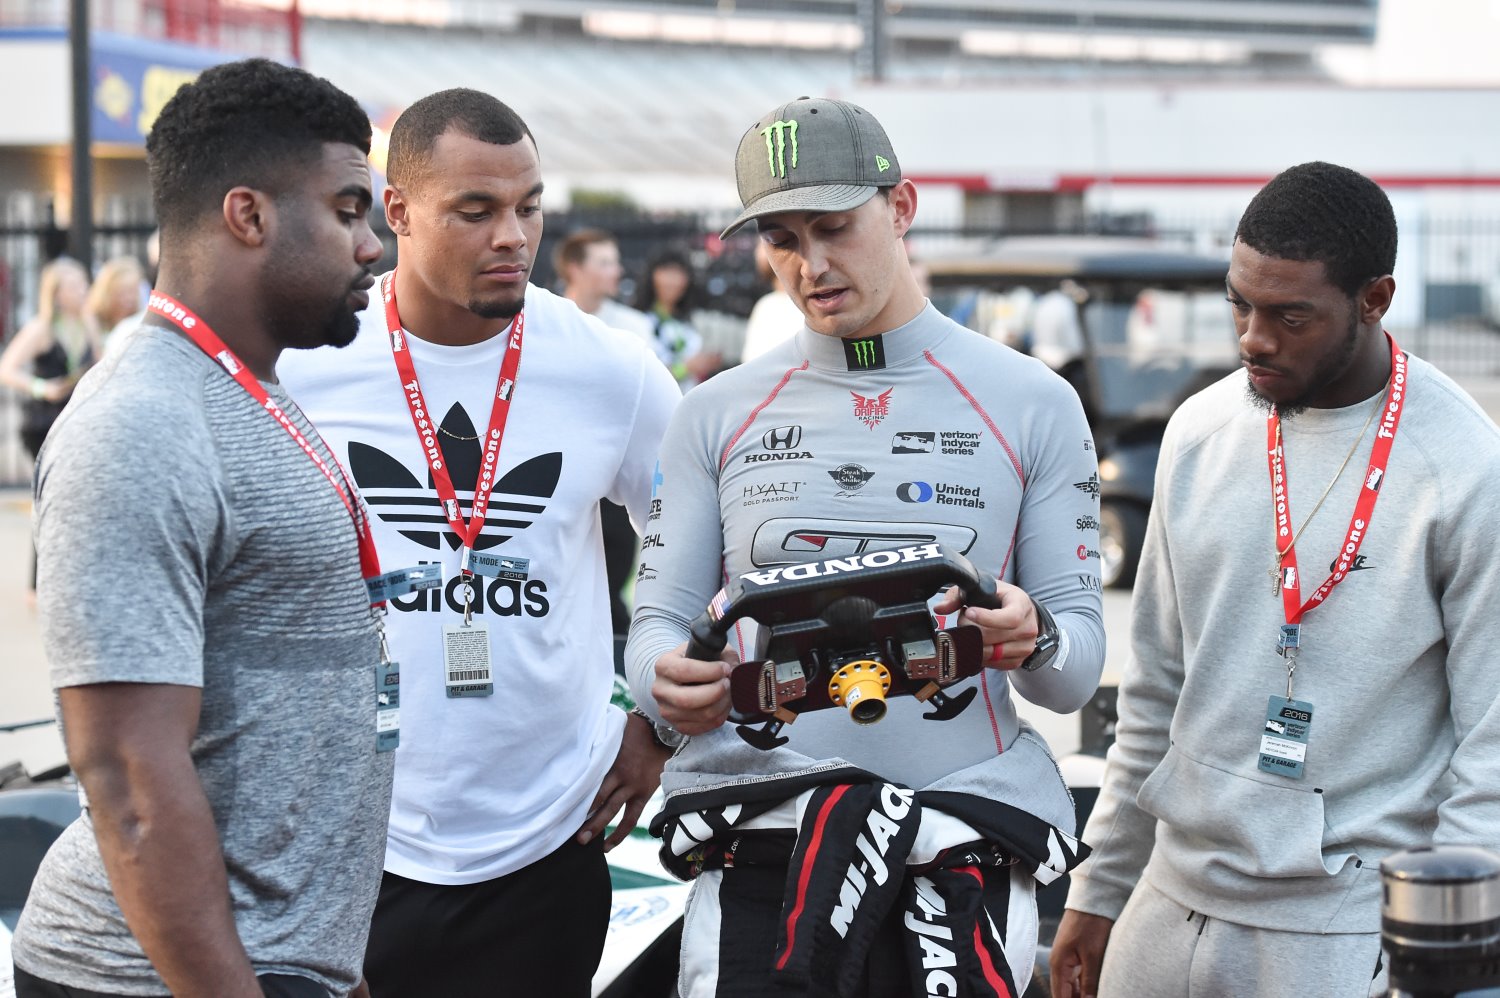 Rahal shows Dallas Cowboy players what all the buttons on his steering wheel do